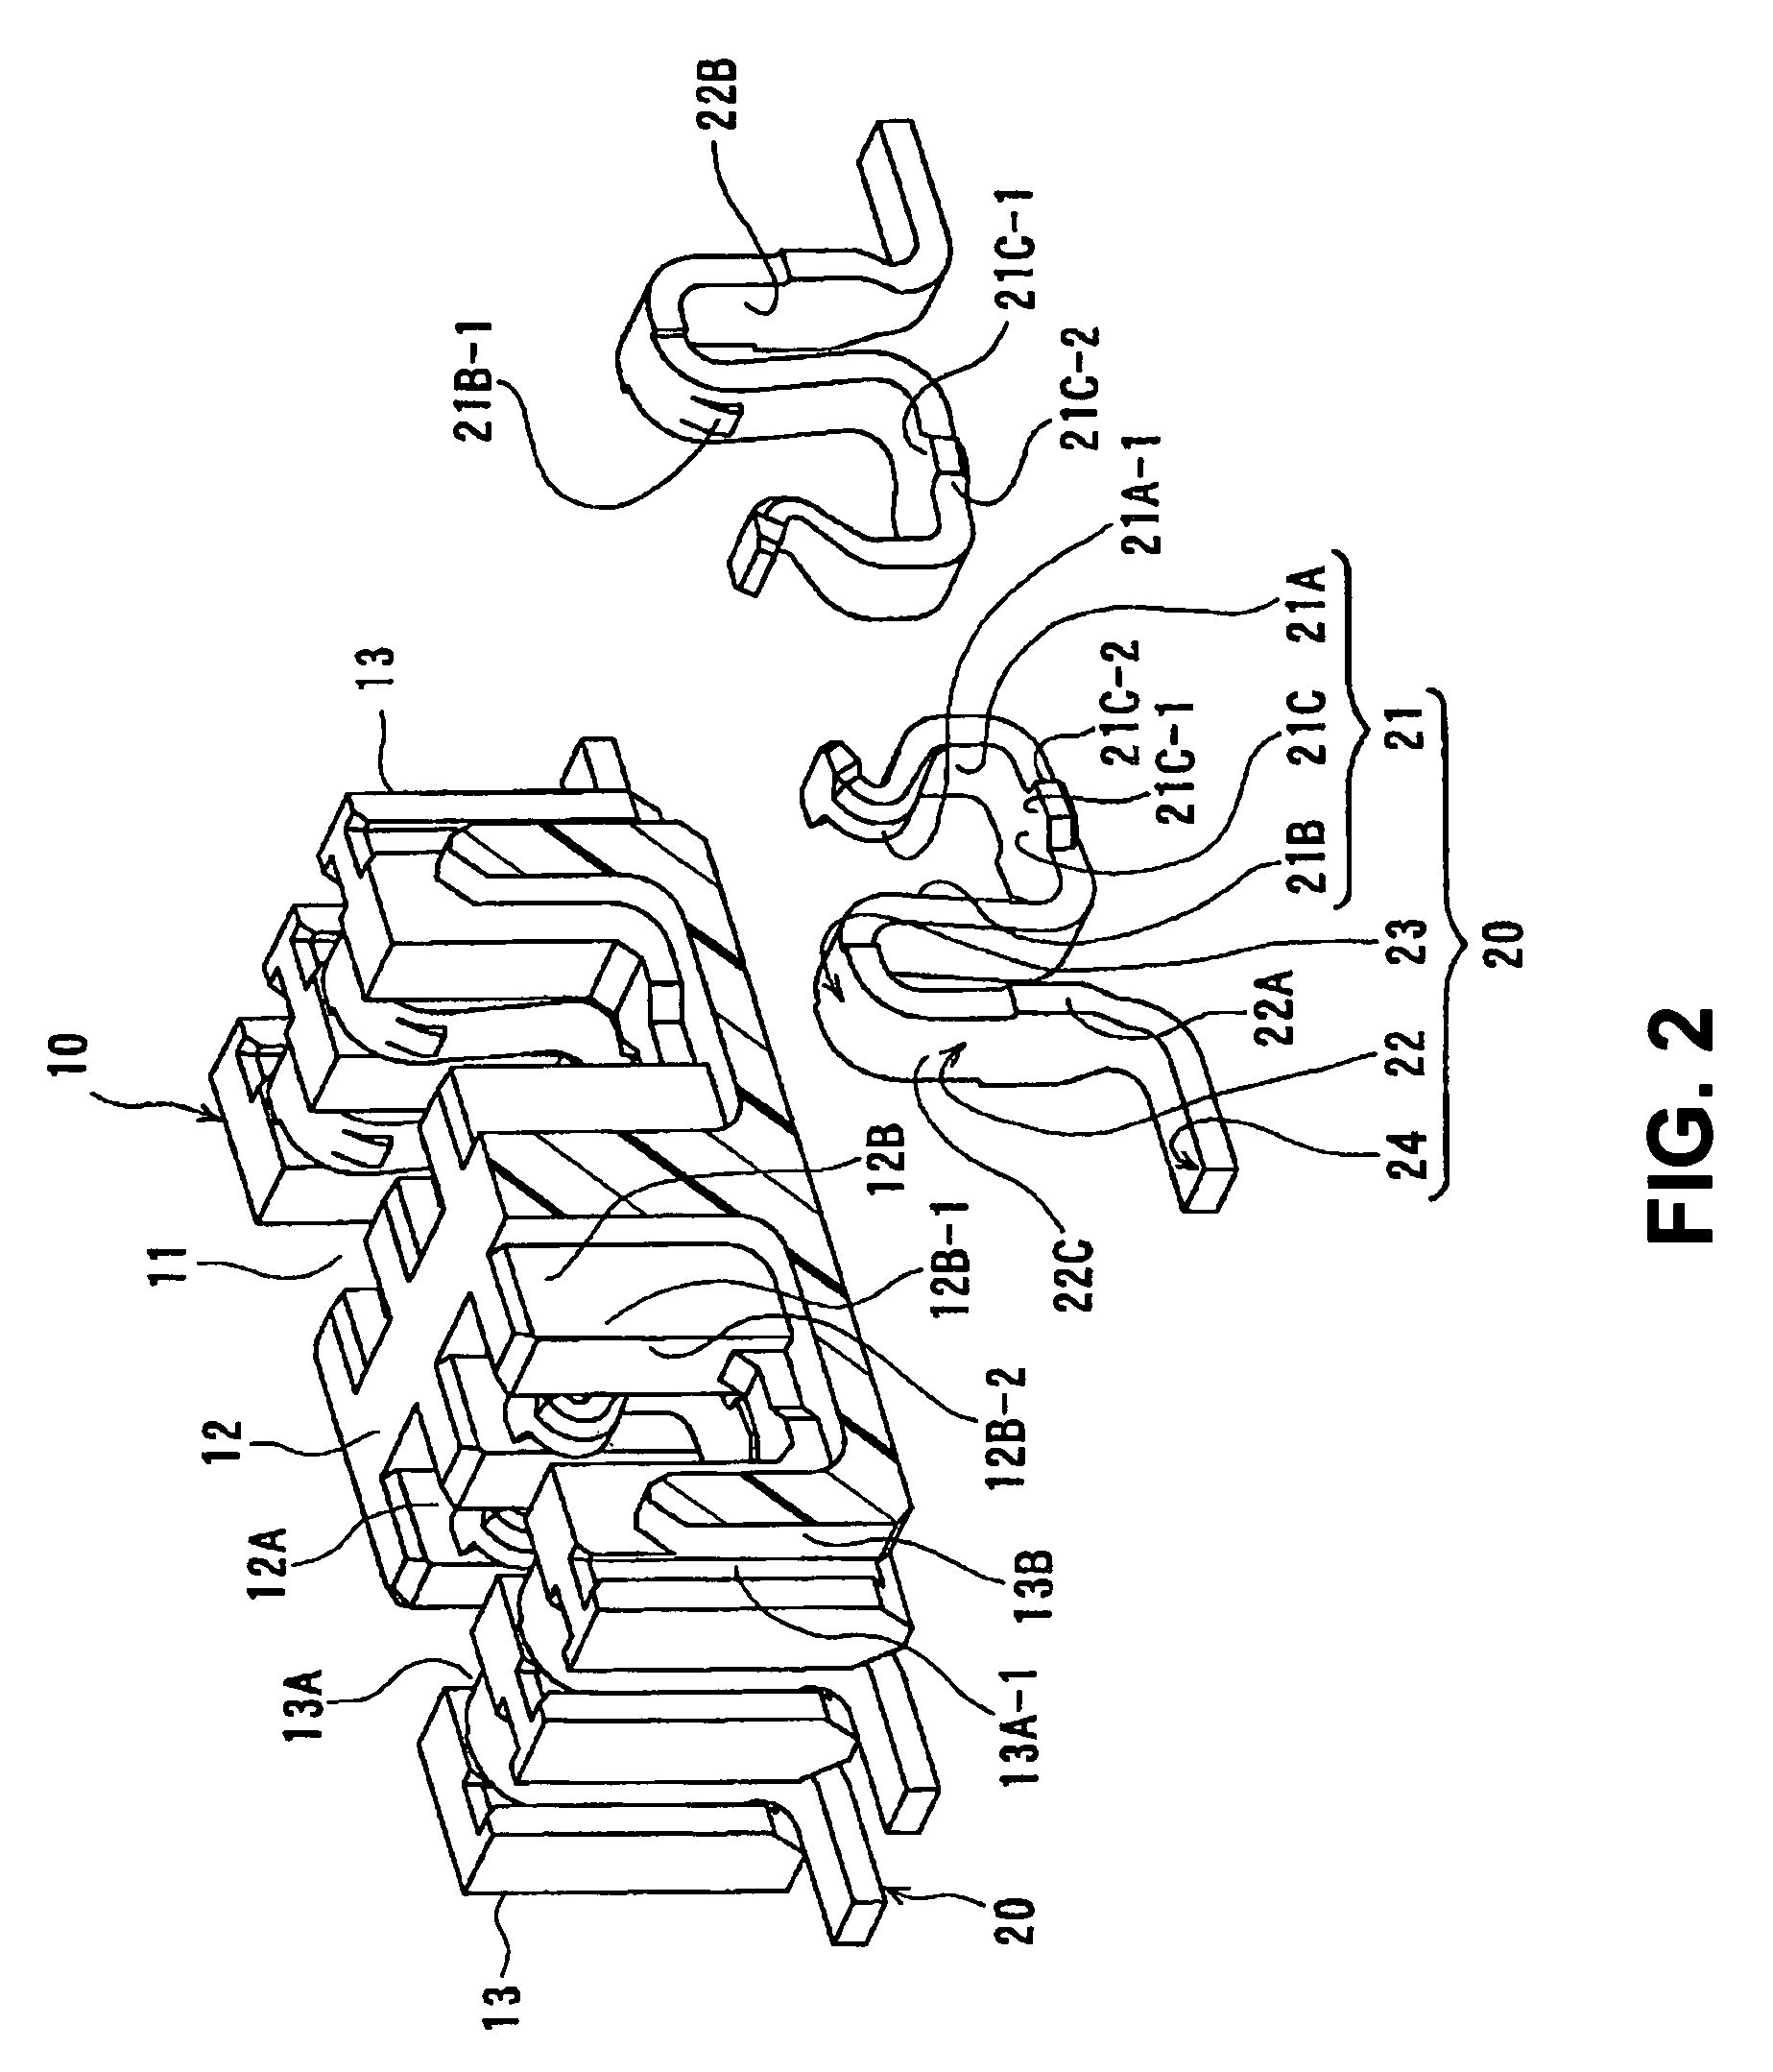 Electrical connector with regulating portion for regulating elastic deformation of terminal